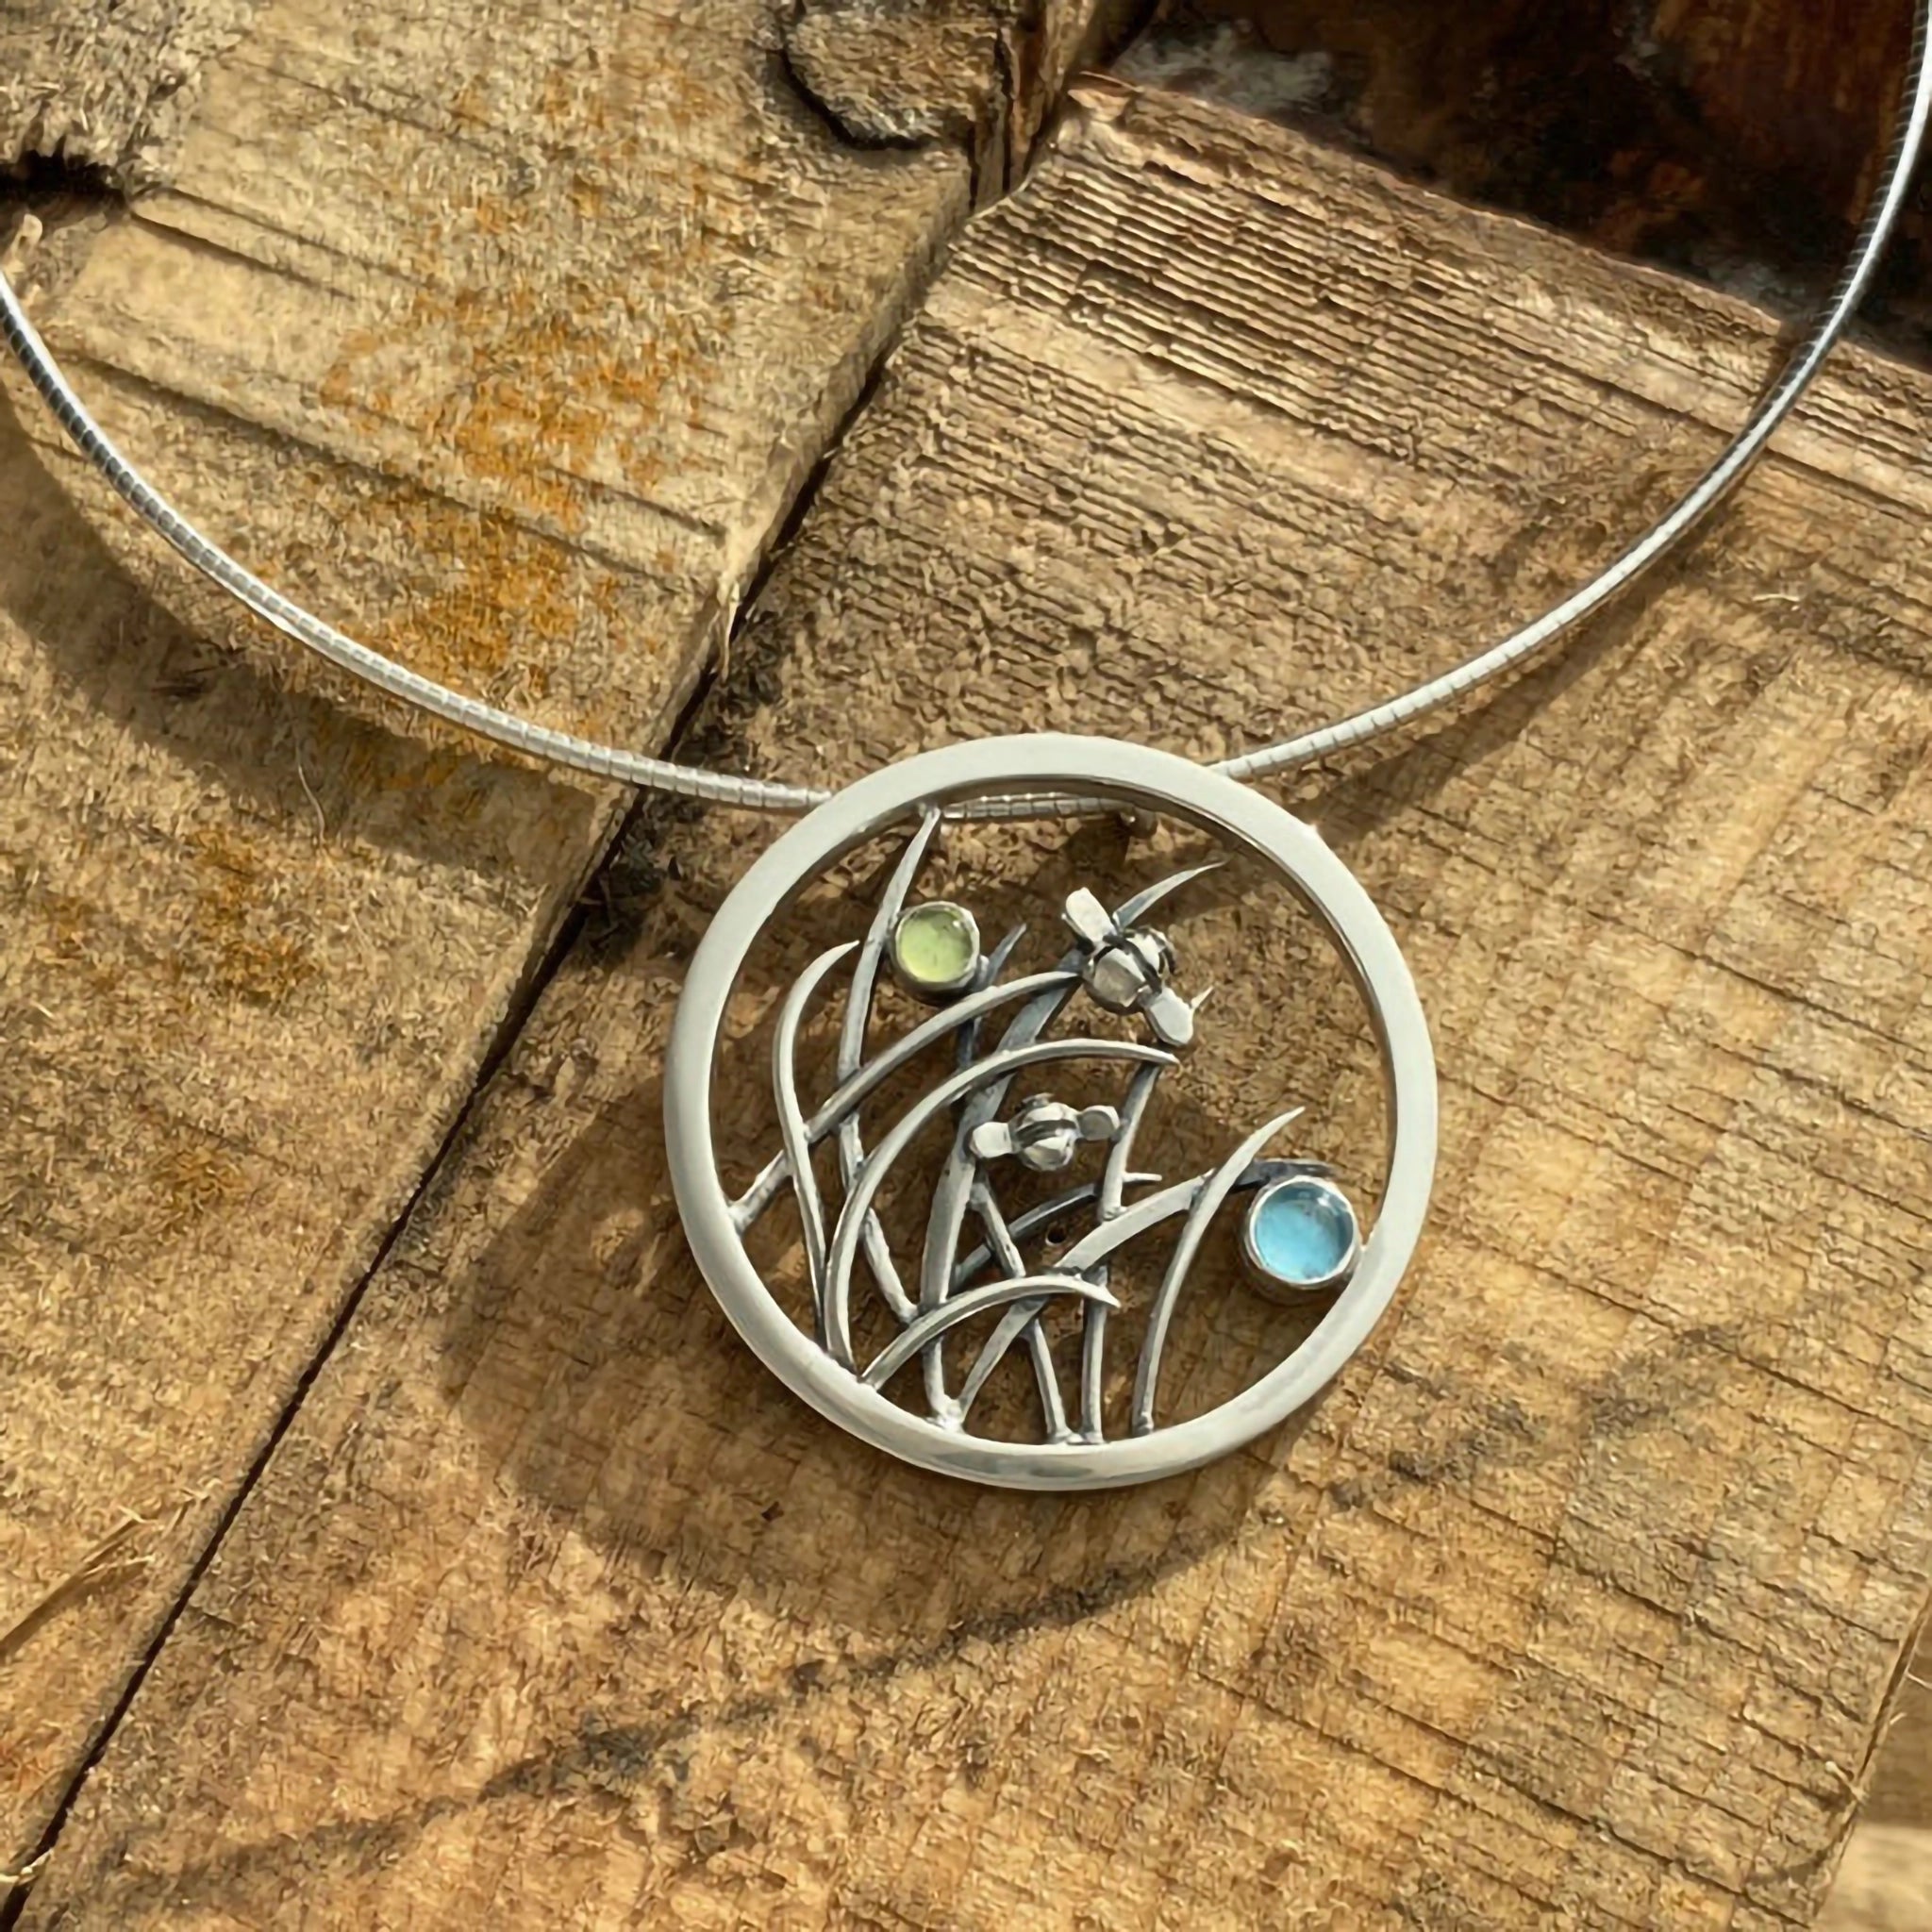 A round necklet featuring bees in tall grass and peridot and blue topaz stones